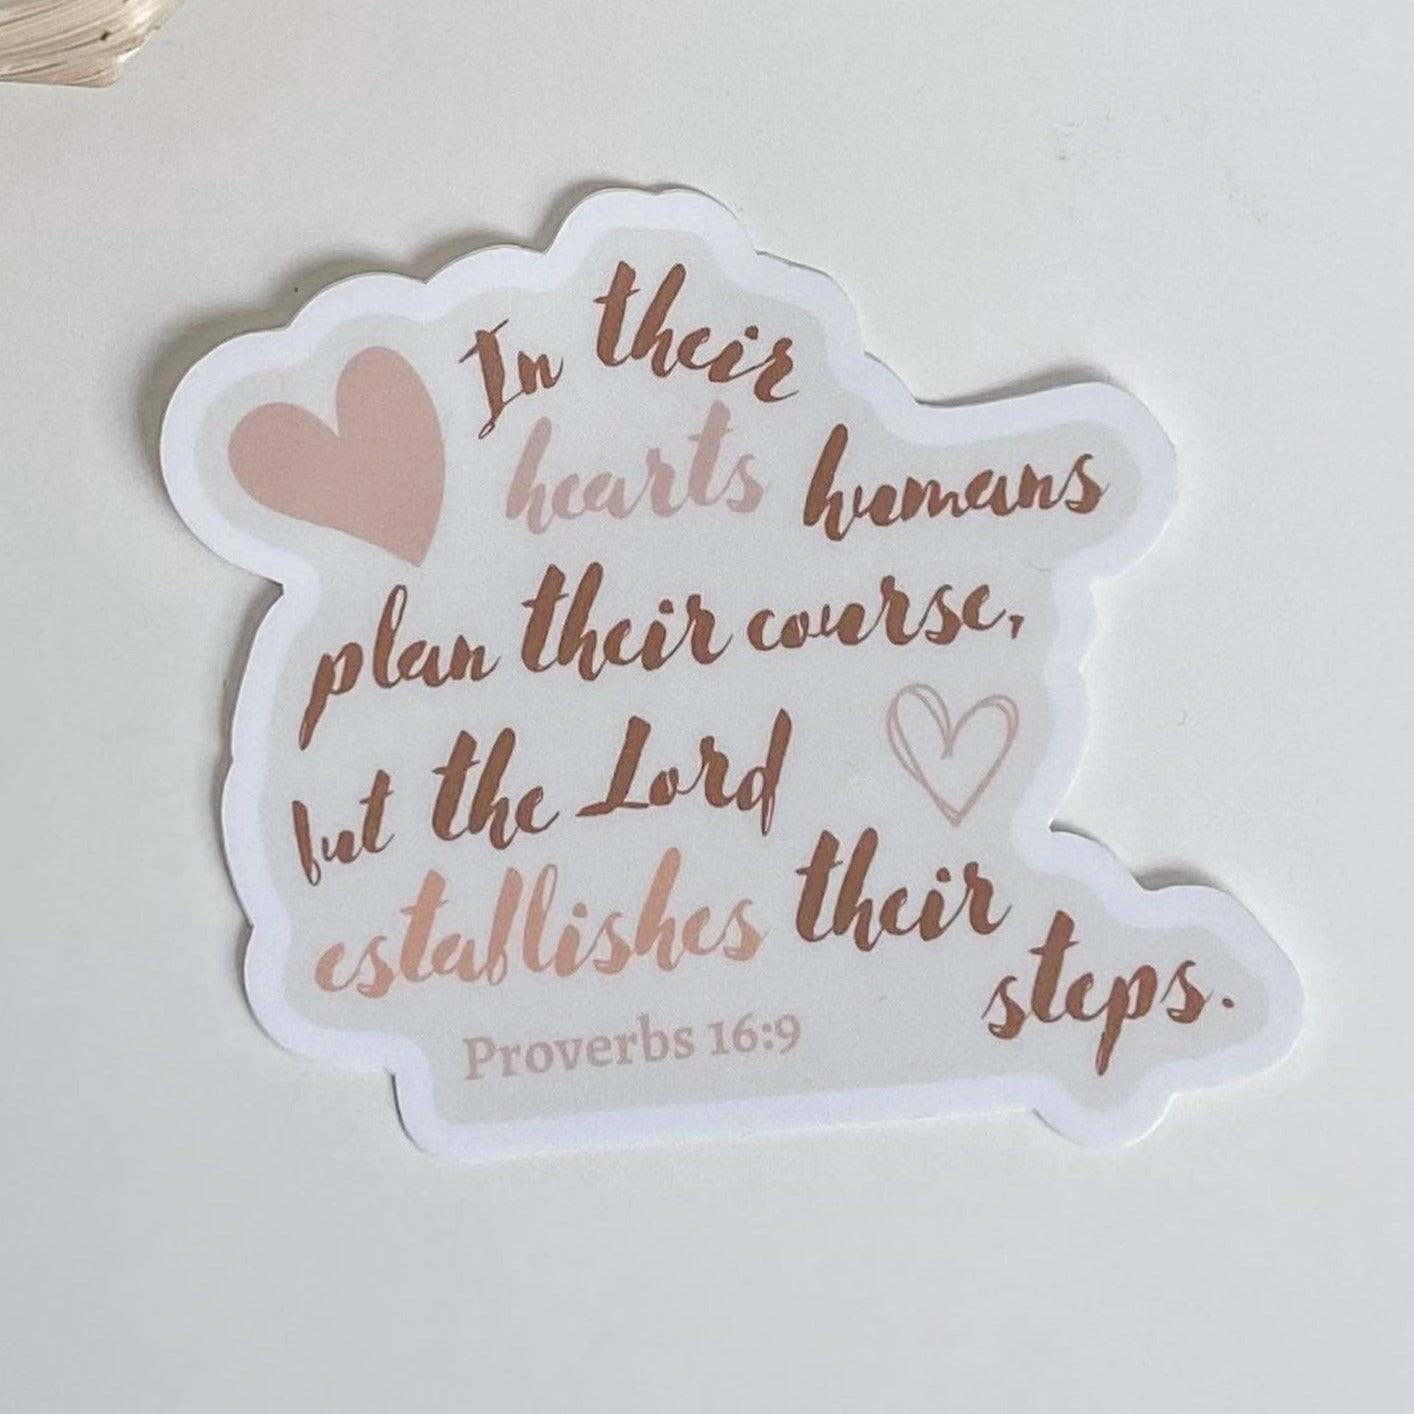 Proverbs 16:9 Sticker - Steadfast and Sustained